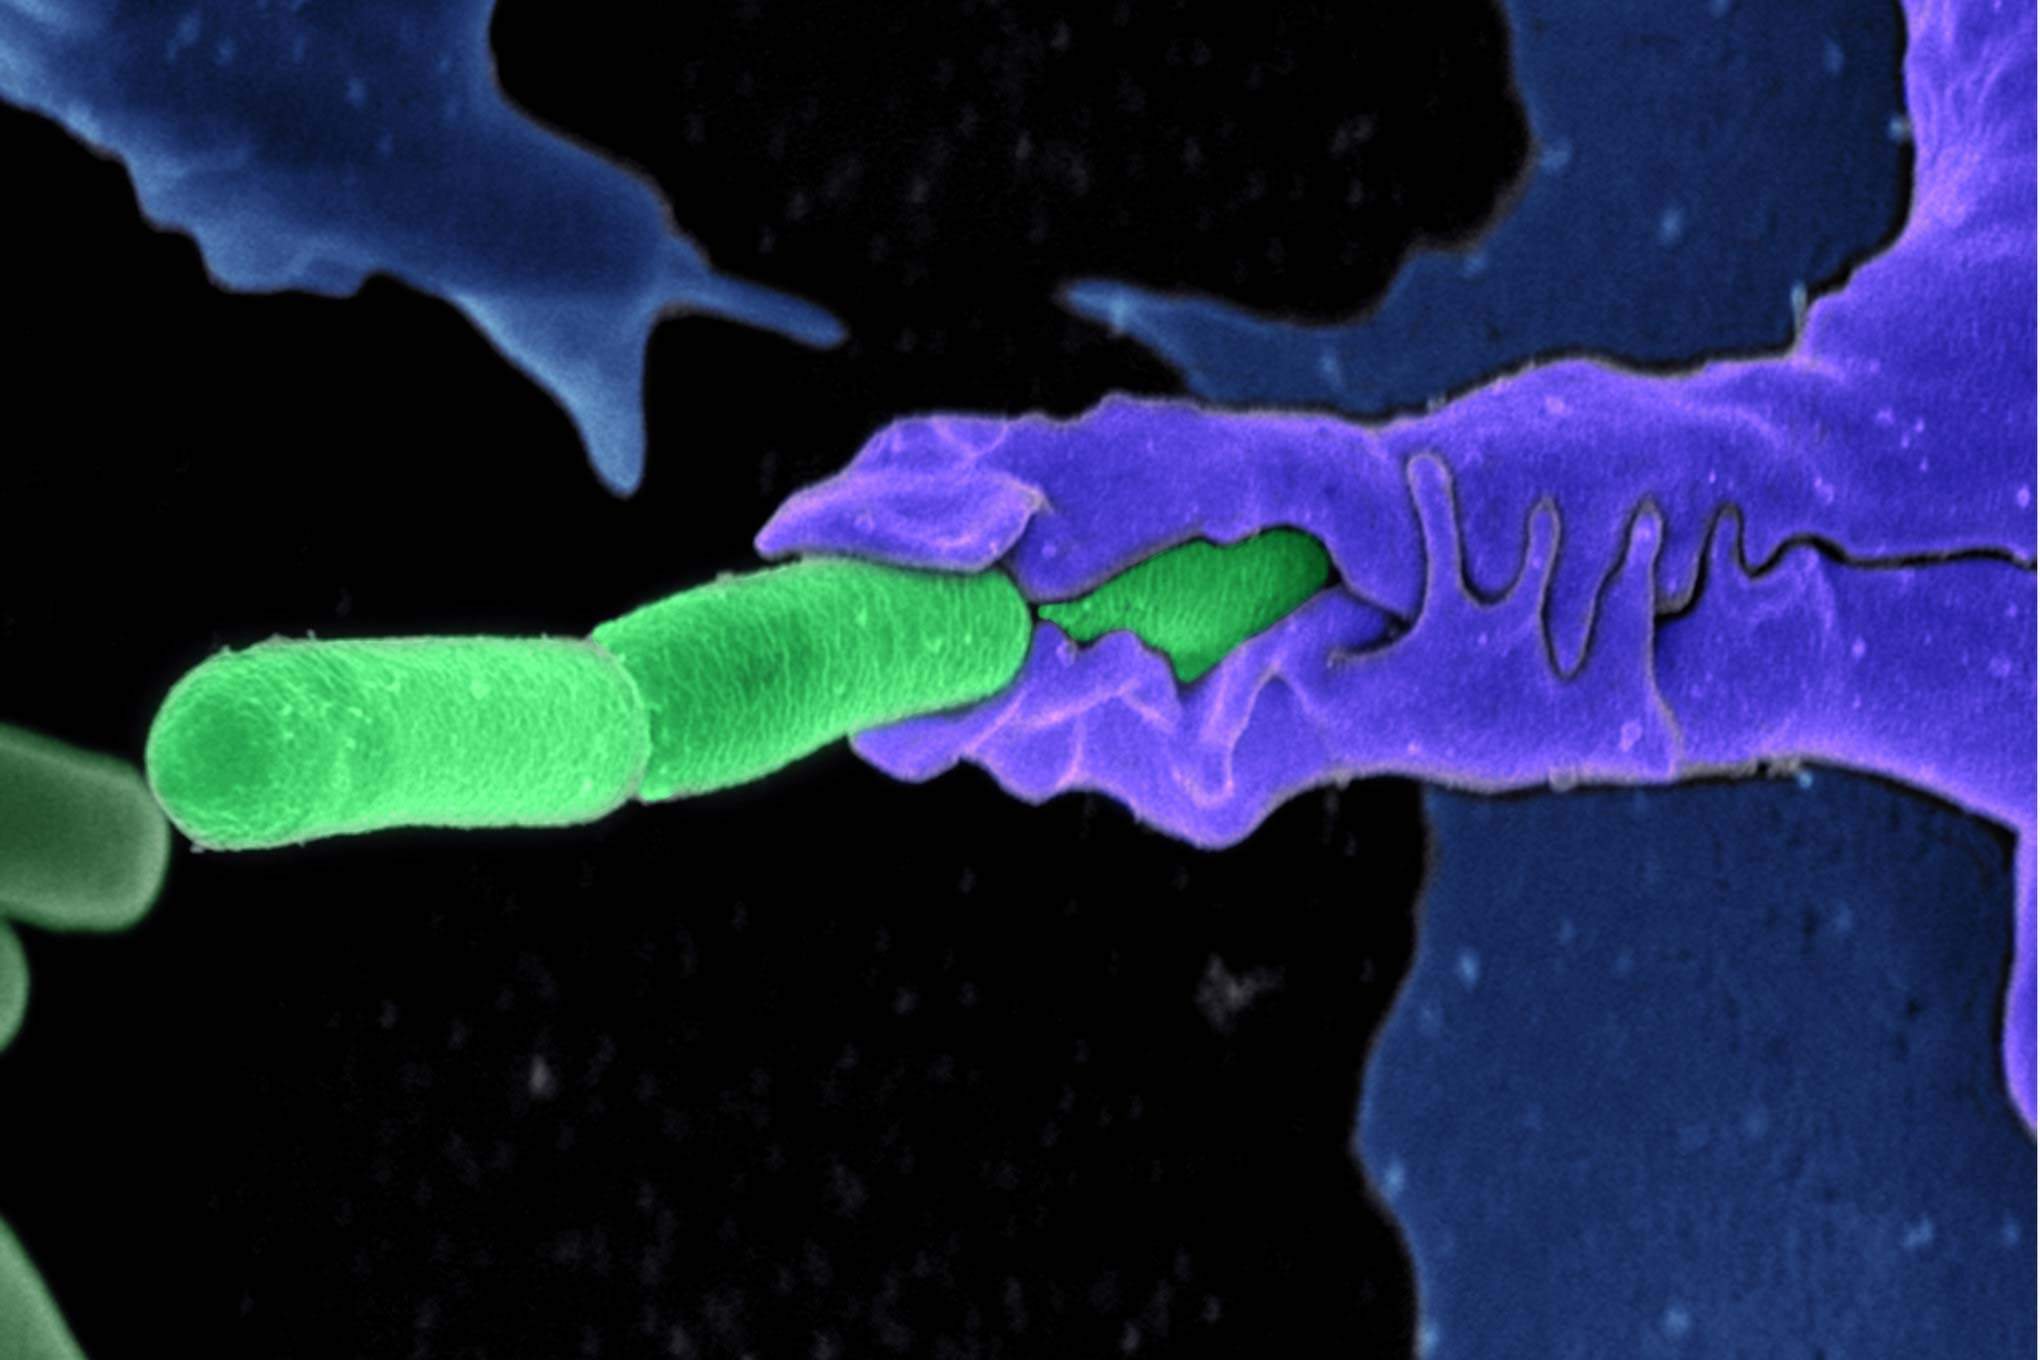 Anthrax bacteria (green) being swallowed by an immune system cell